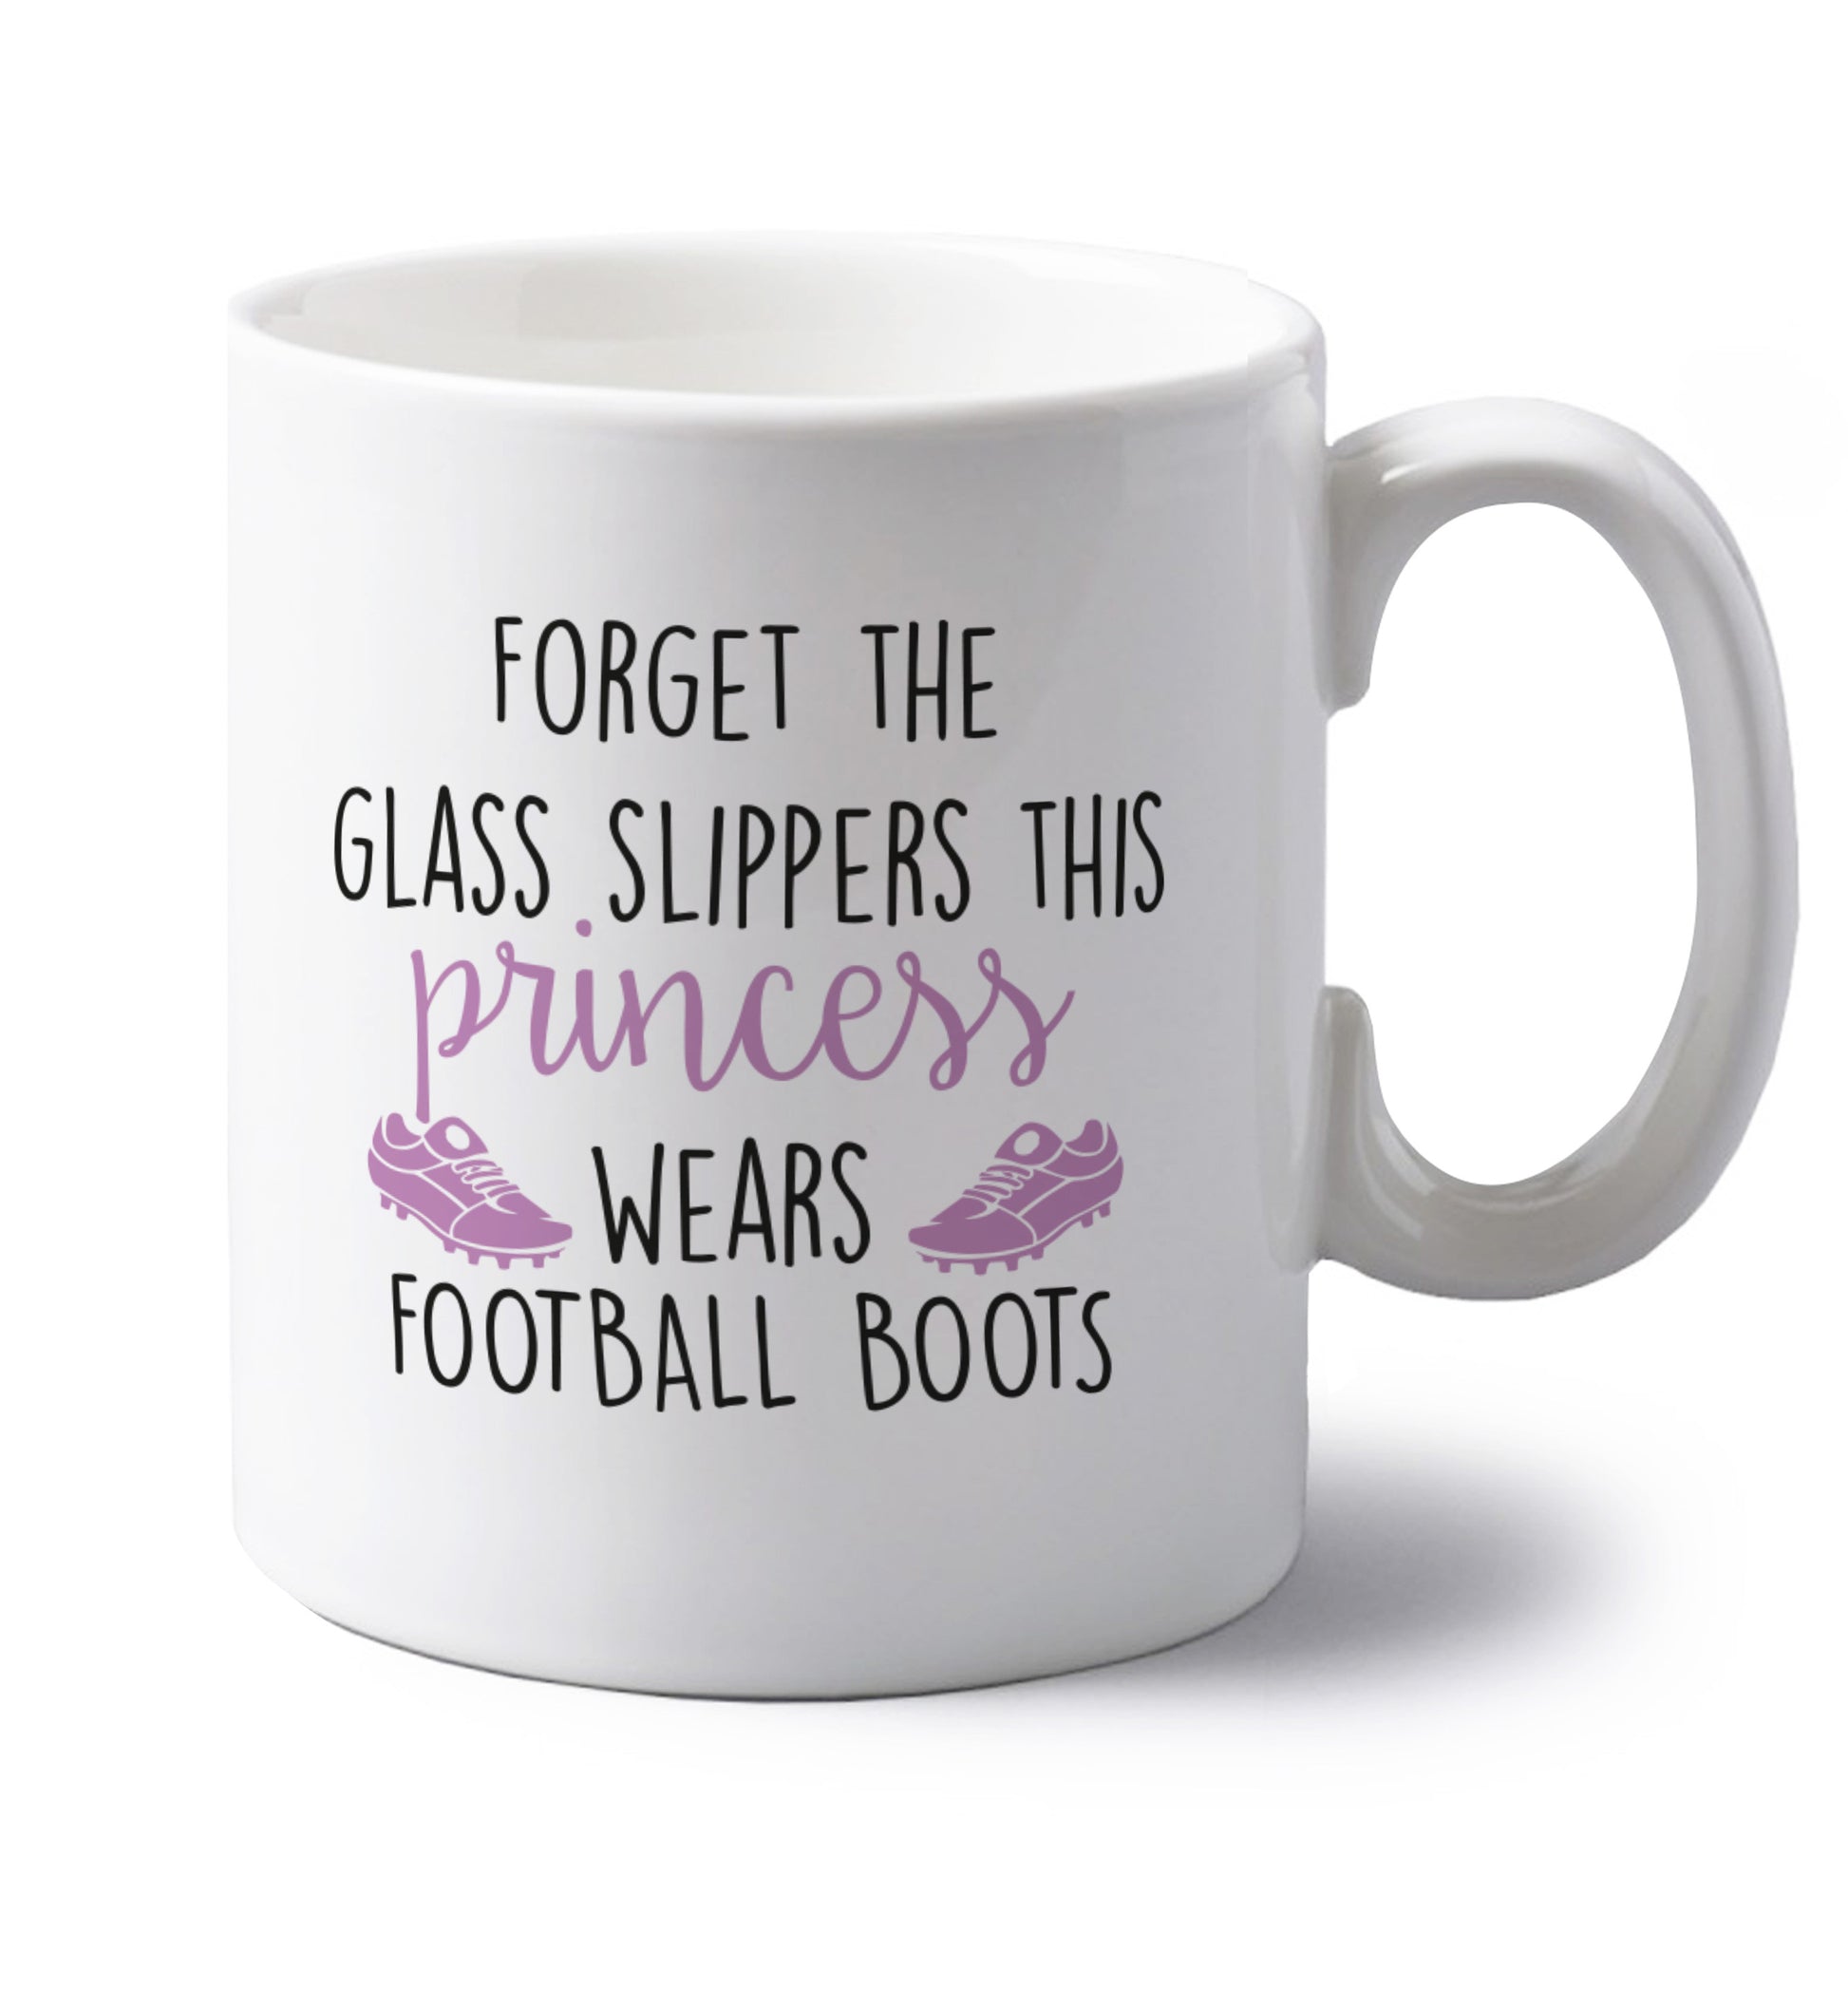 Forget the glass slippers this princess wears football boots left handed white ceramic mug 